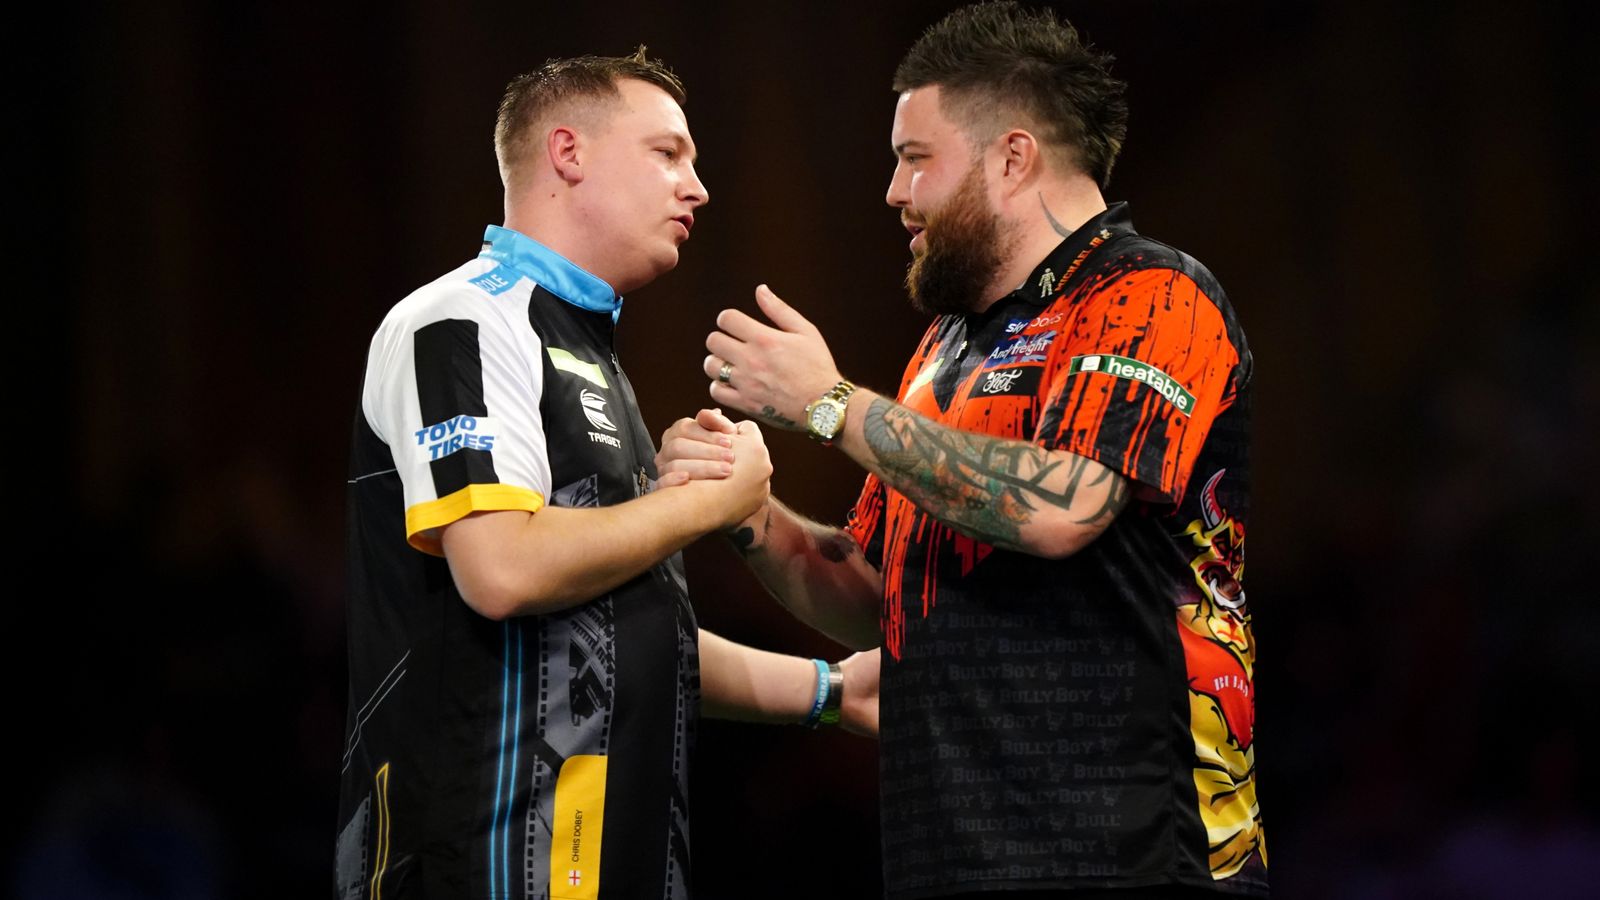 World Darts Championship Michael Smith is dethroned by Chris Dobey as